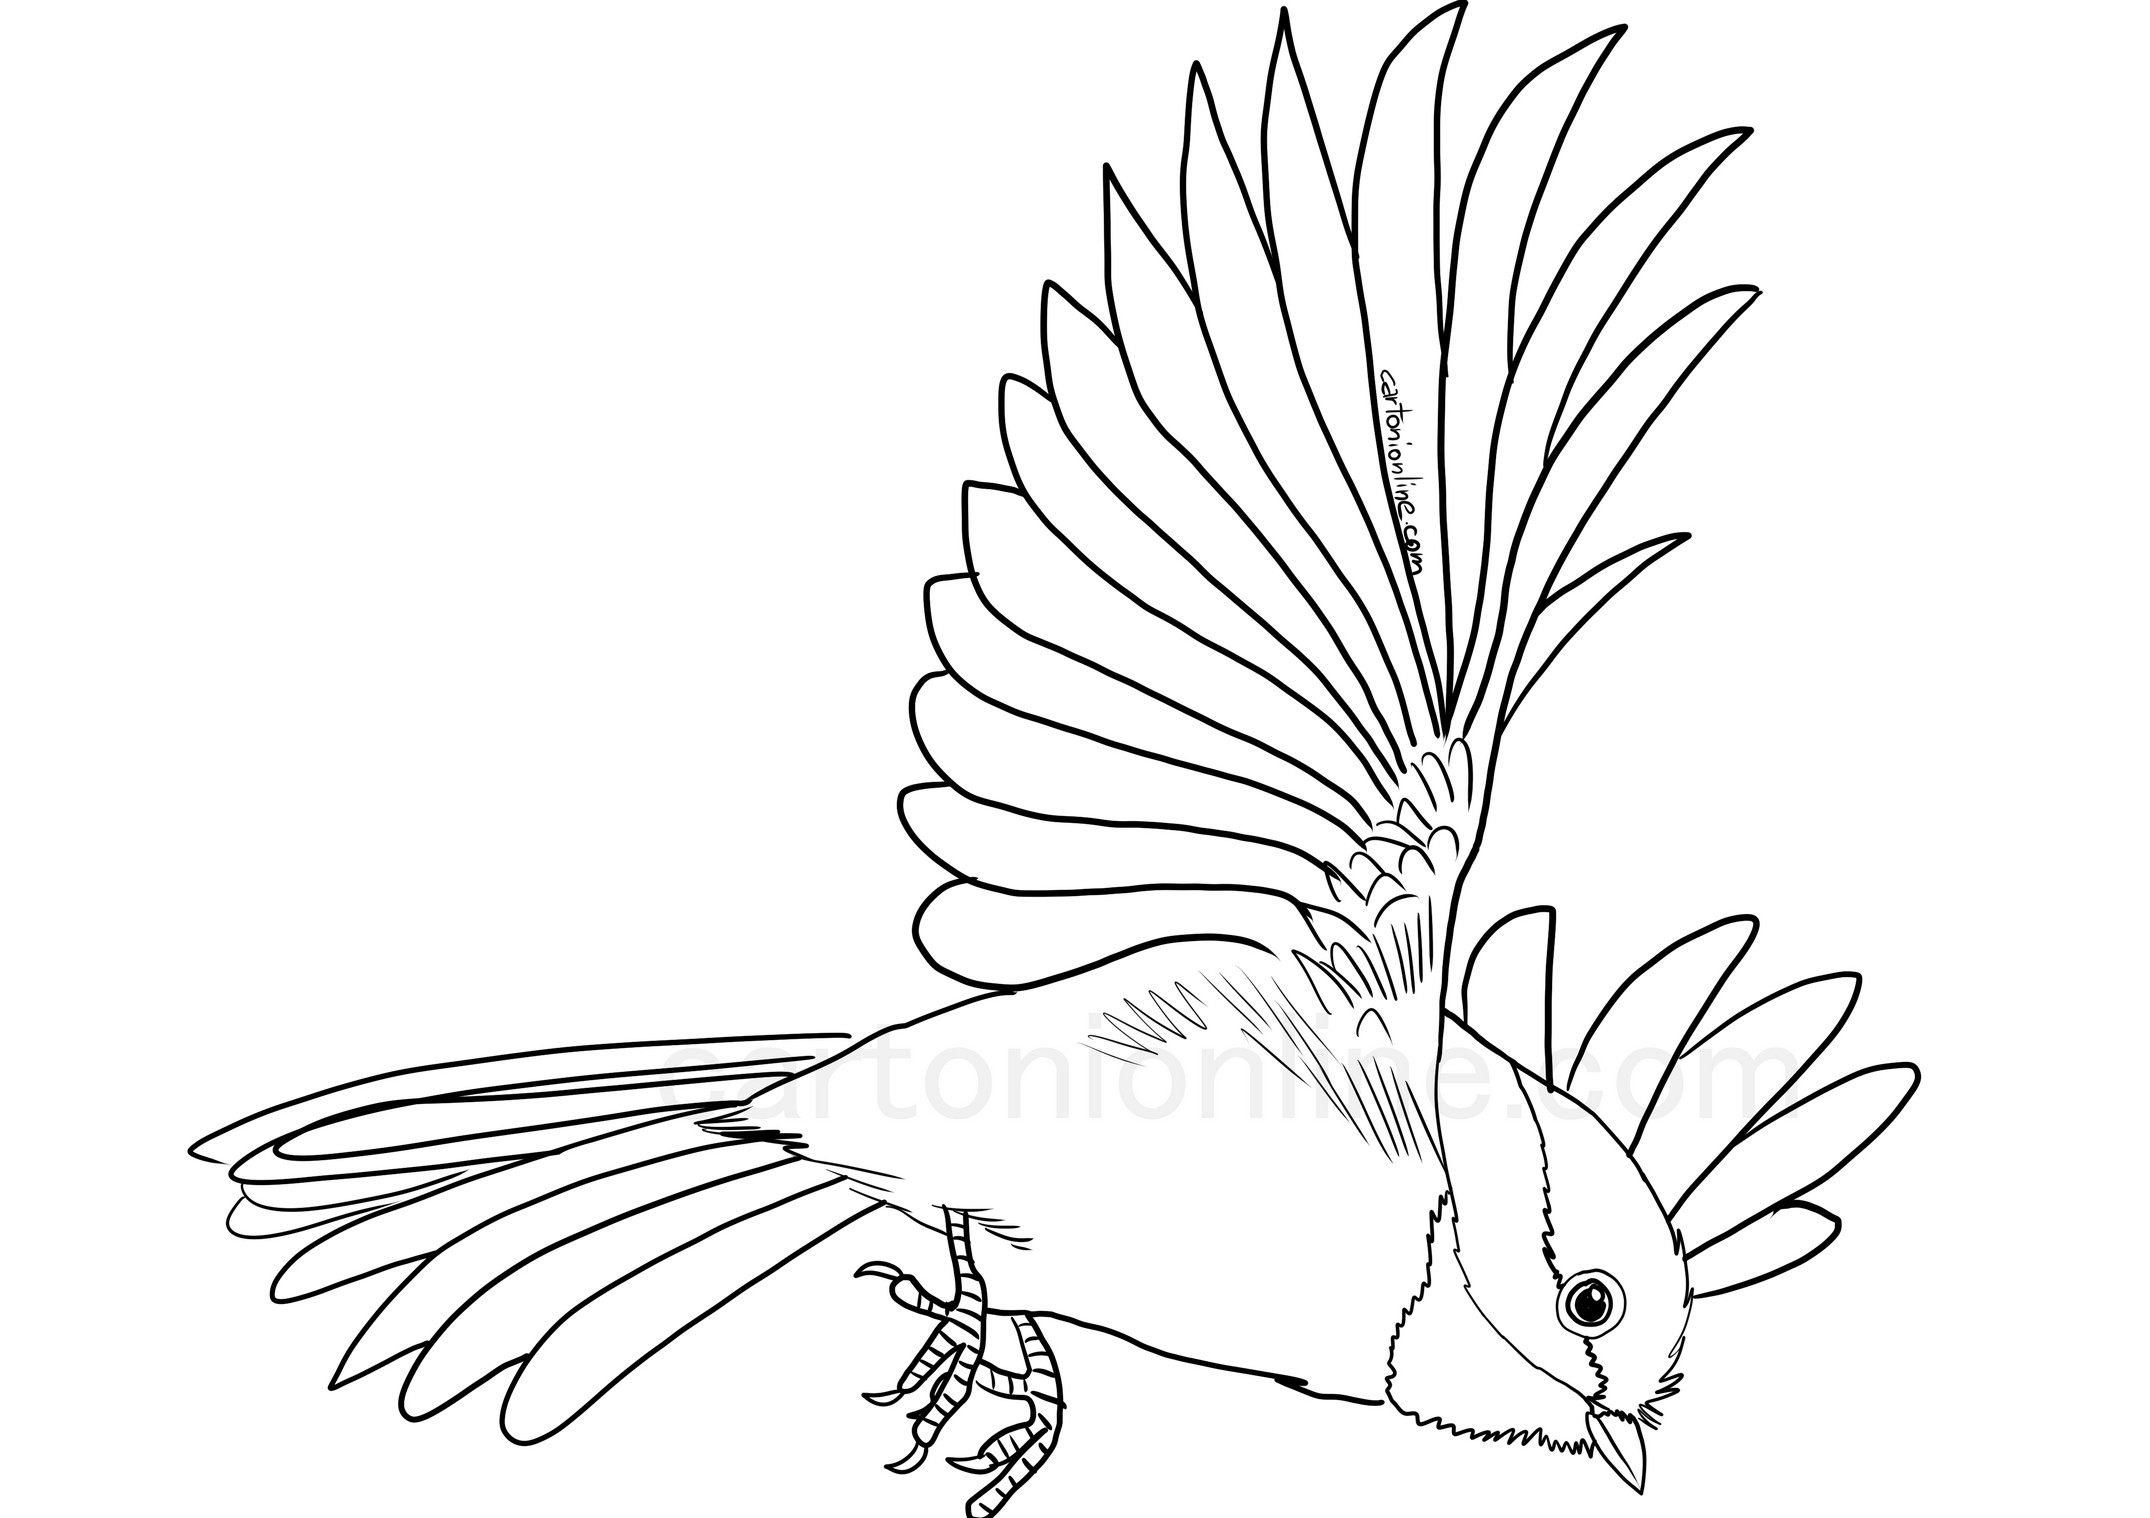 Realistic road runner coloring page